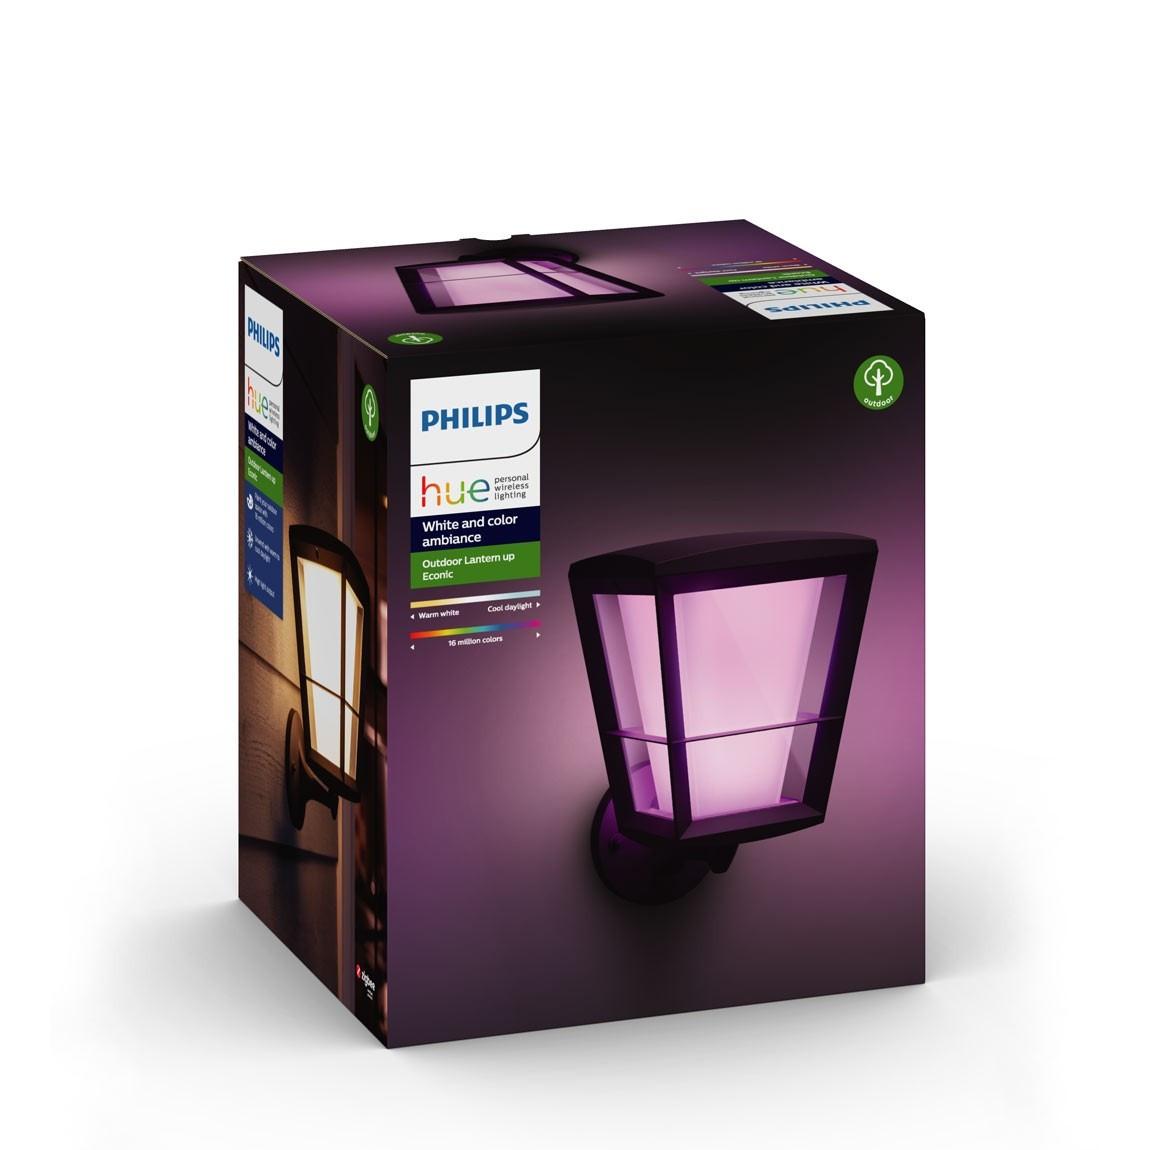 Philips Hue White & Color Ambiance Econic Wandleuchte Stehend 1140 lm Verpackung